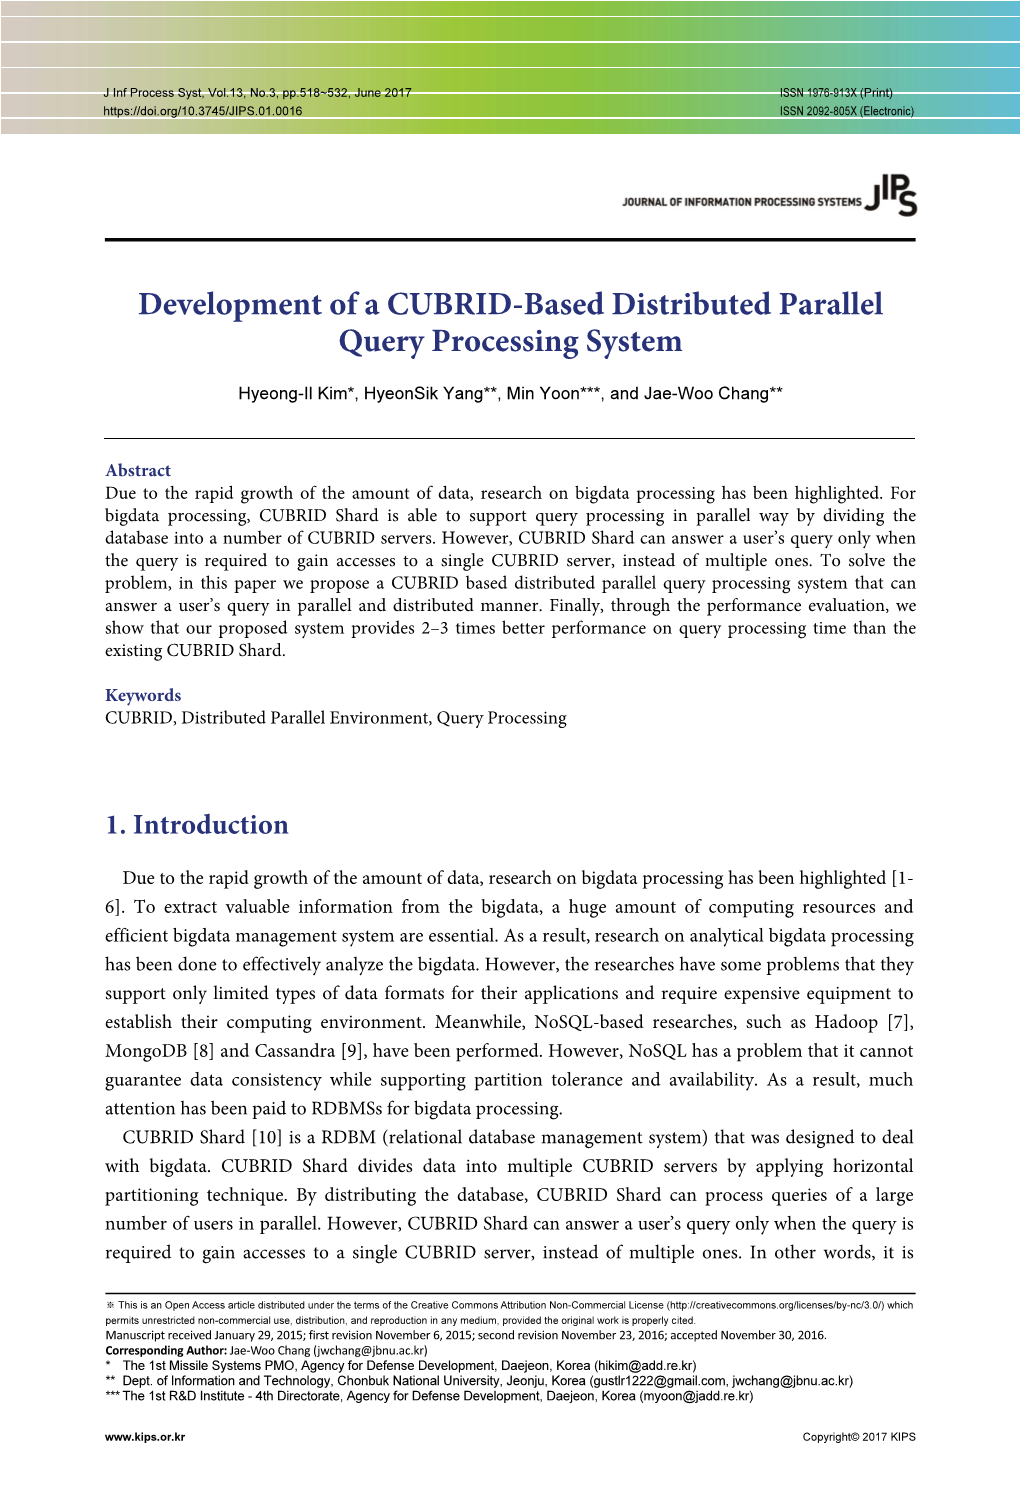 Development of a CUBRID-Based Distributed Parallel Query Processing System